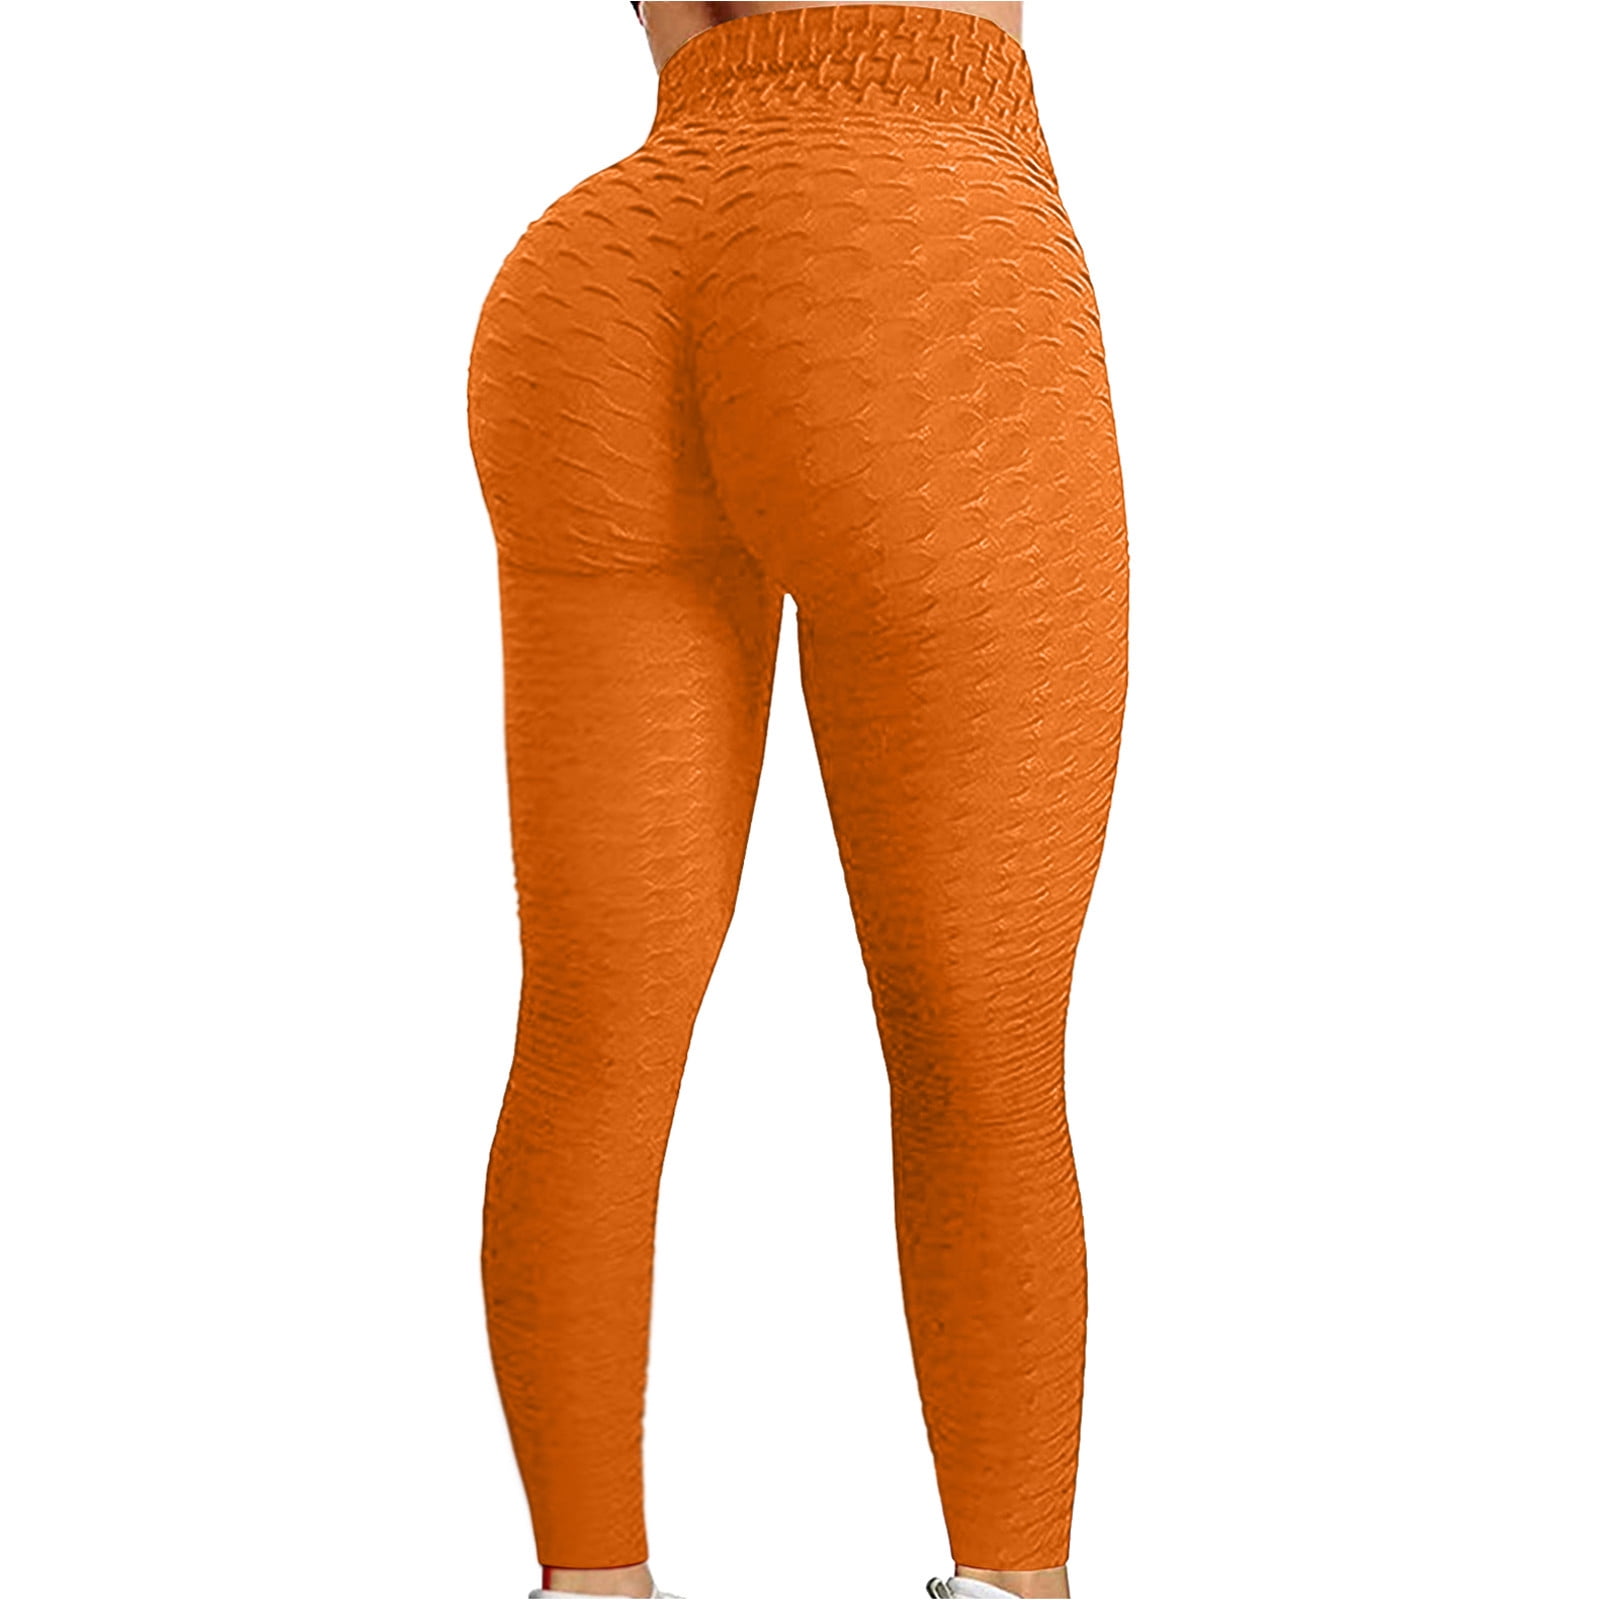  Scrunch Butt Lifting Leggings with Pockets for Women Butt Lift  High Waisted Peach Lift TIK Tok Leggings Yoga Pants : Clothing, Shoes &  Jewelry